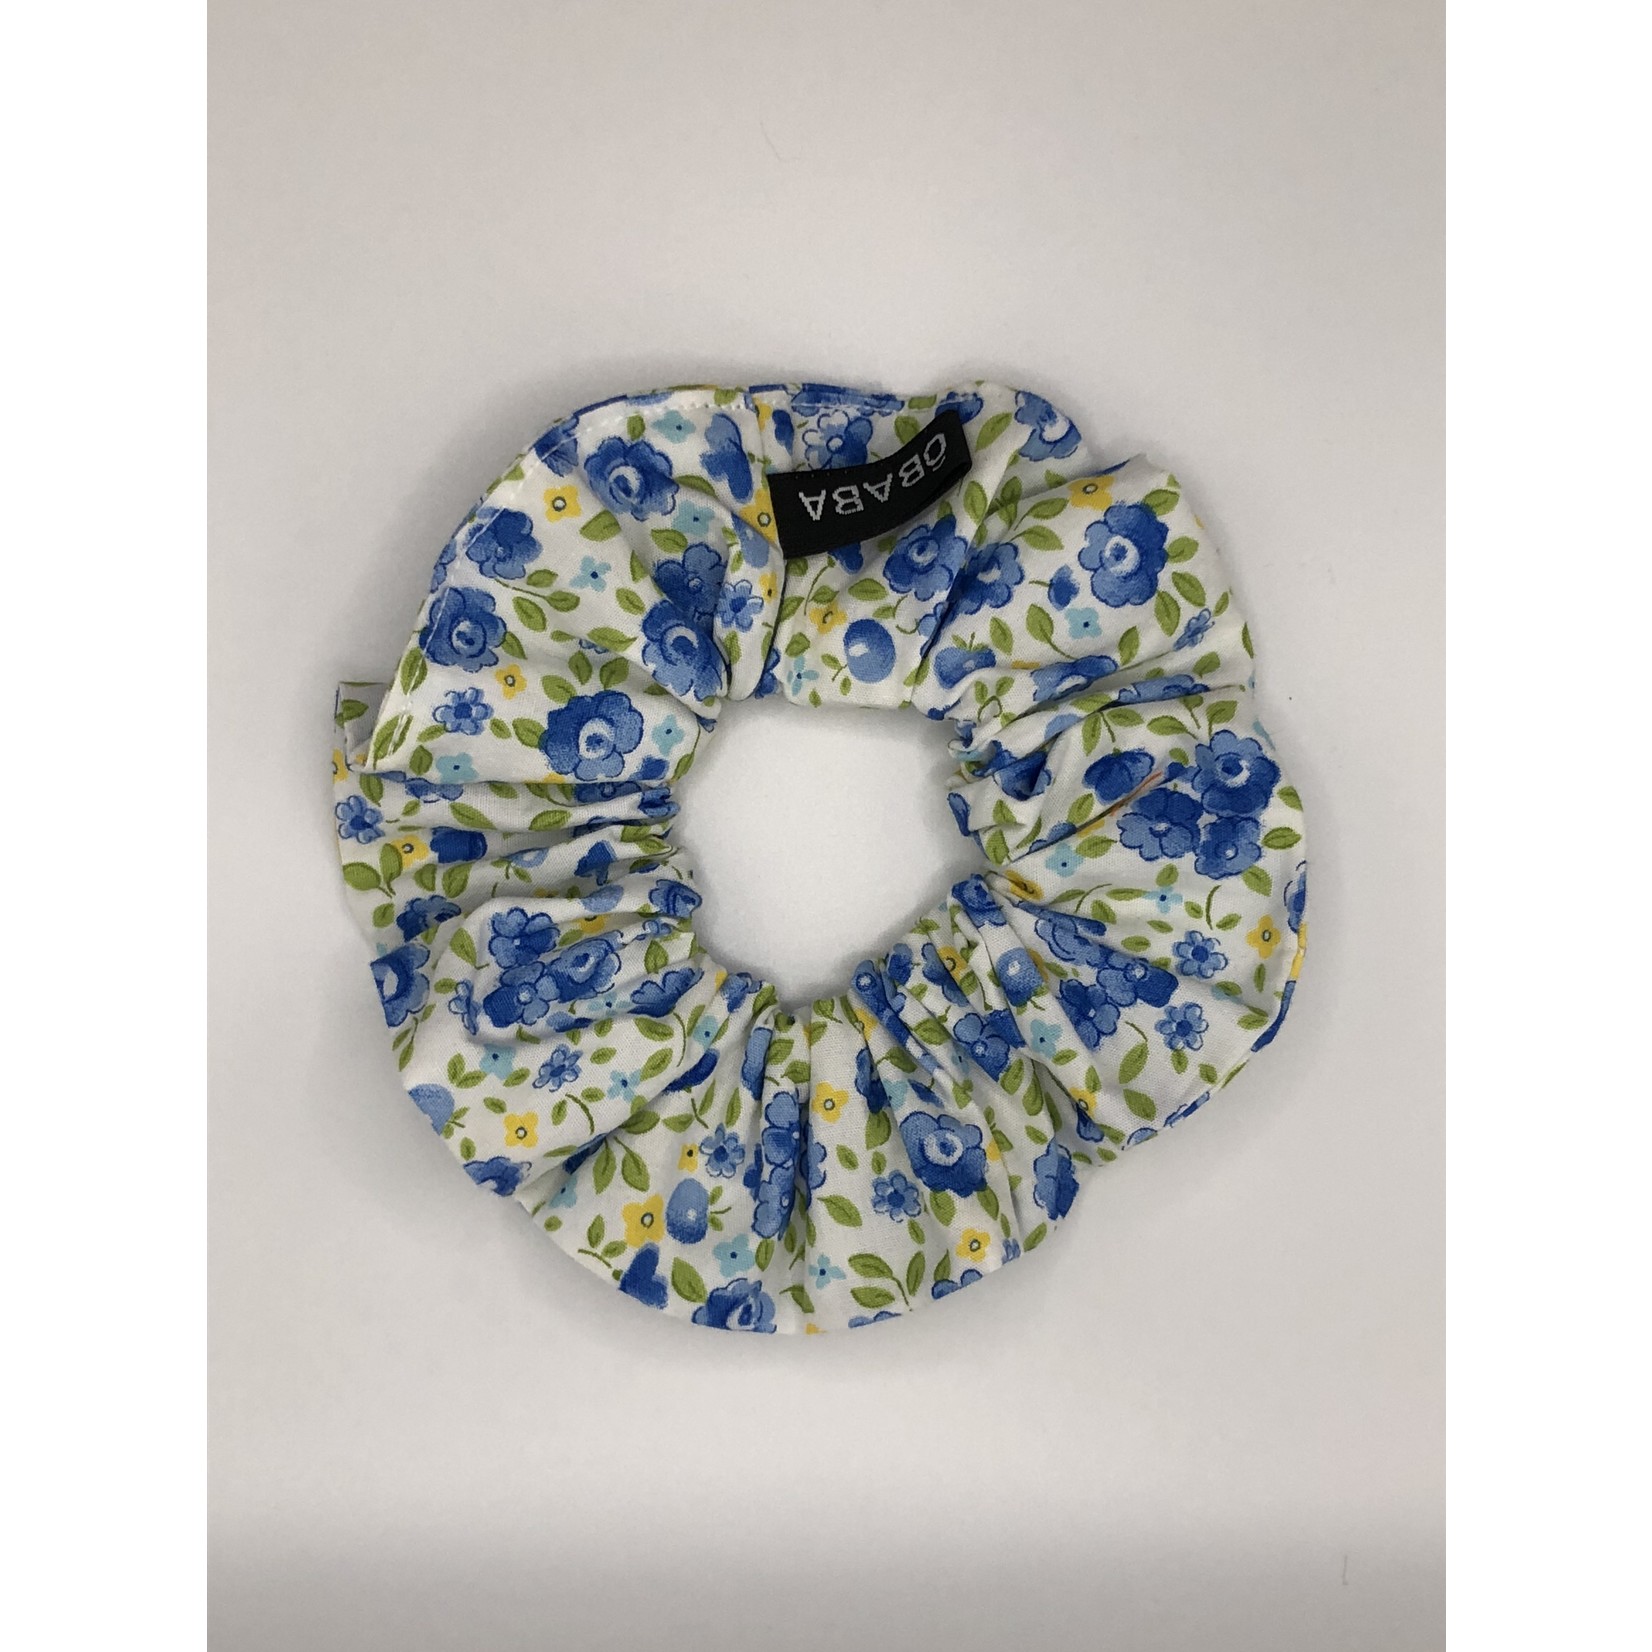 Obaba Scrunchies in different colors and motifs